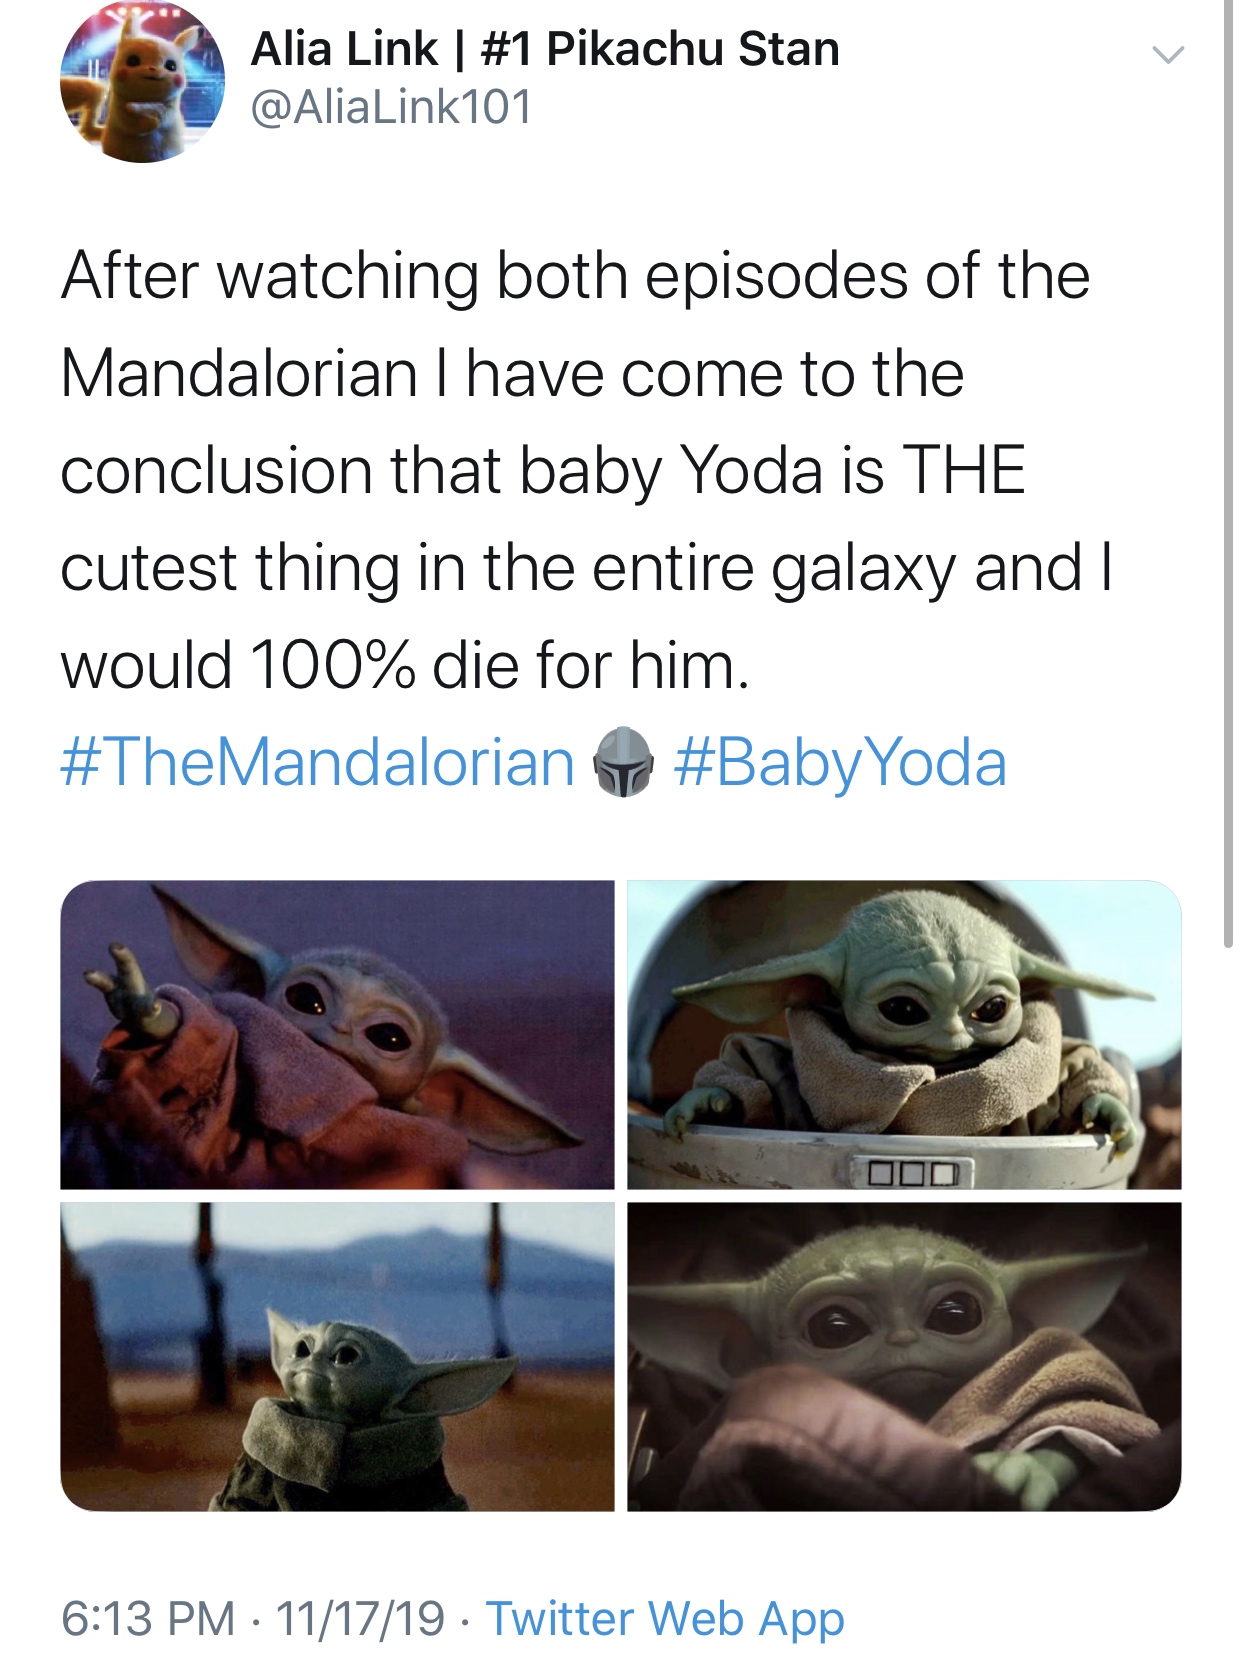 baby yoda meme - reptile - Alia Link | Pikachu Stan 101 After watching both episodes of the Mandalorian I have come to the conclusion that baby Yoda is The cutest thing in the entire galaxy and would 100% die for him. Yoda 111719. Twitter Web App